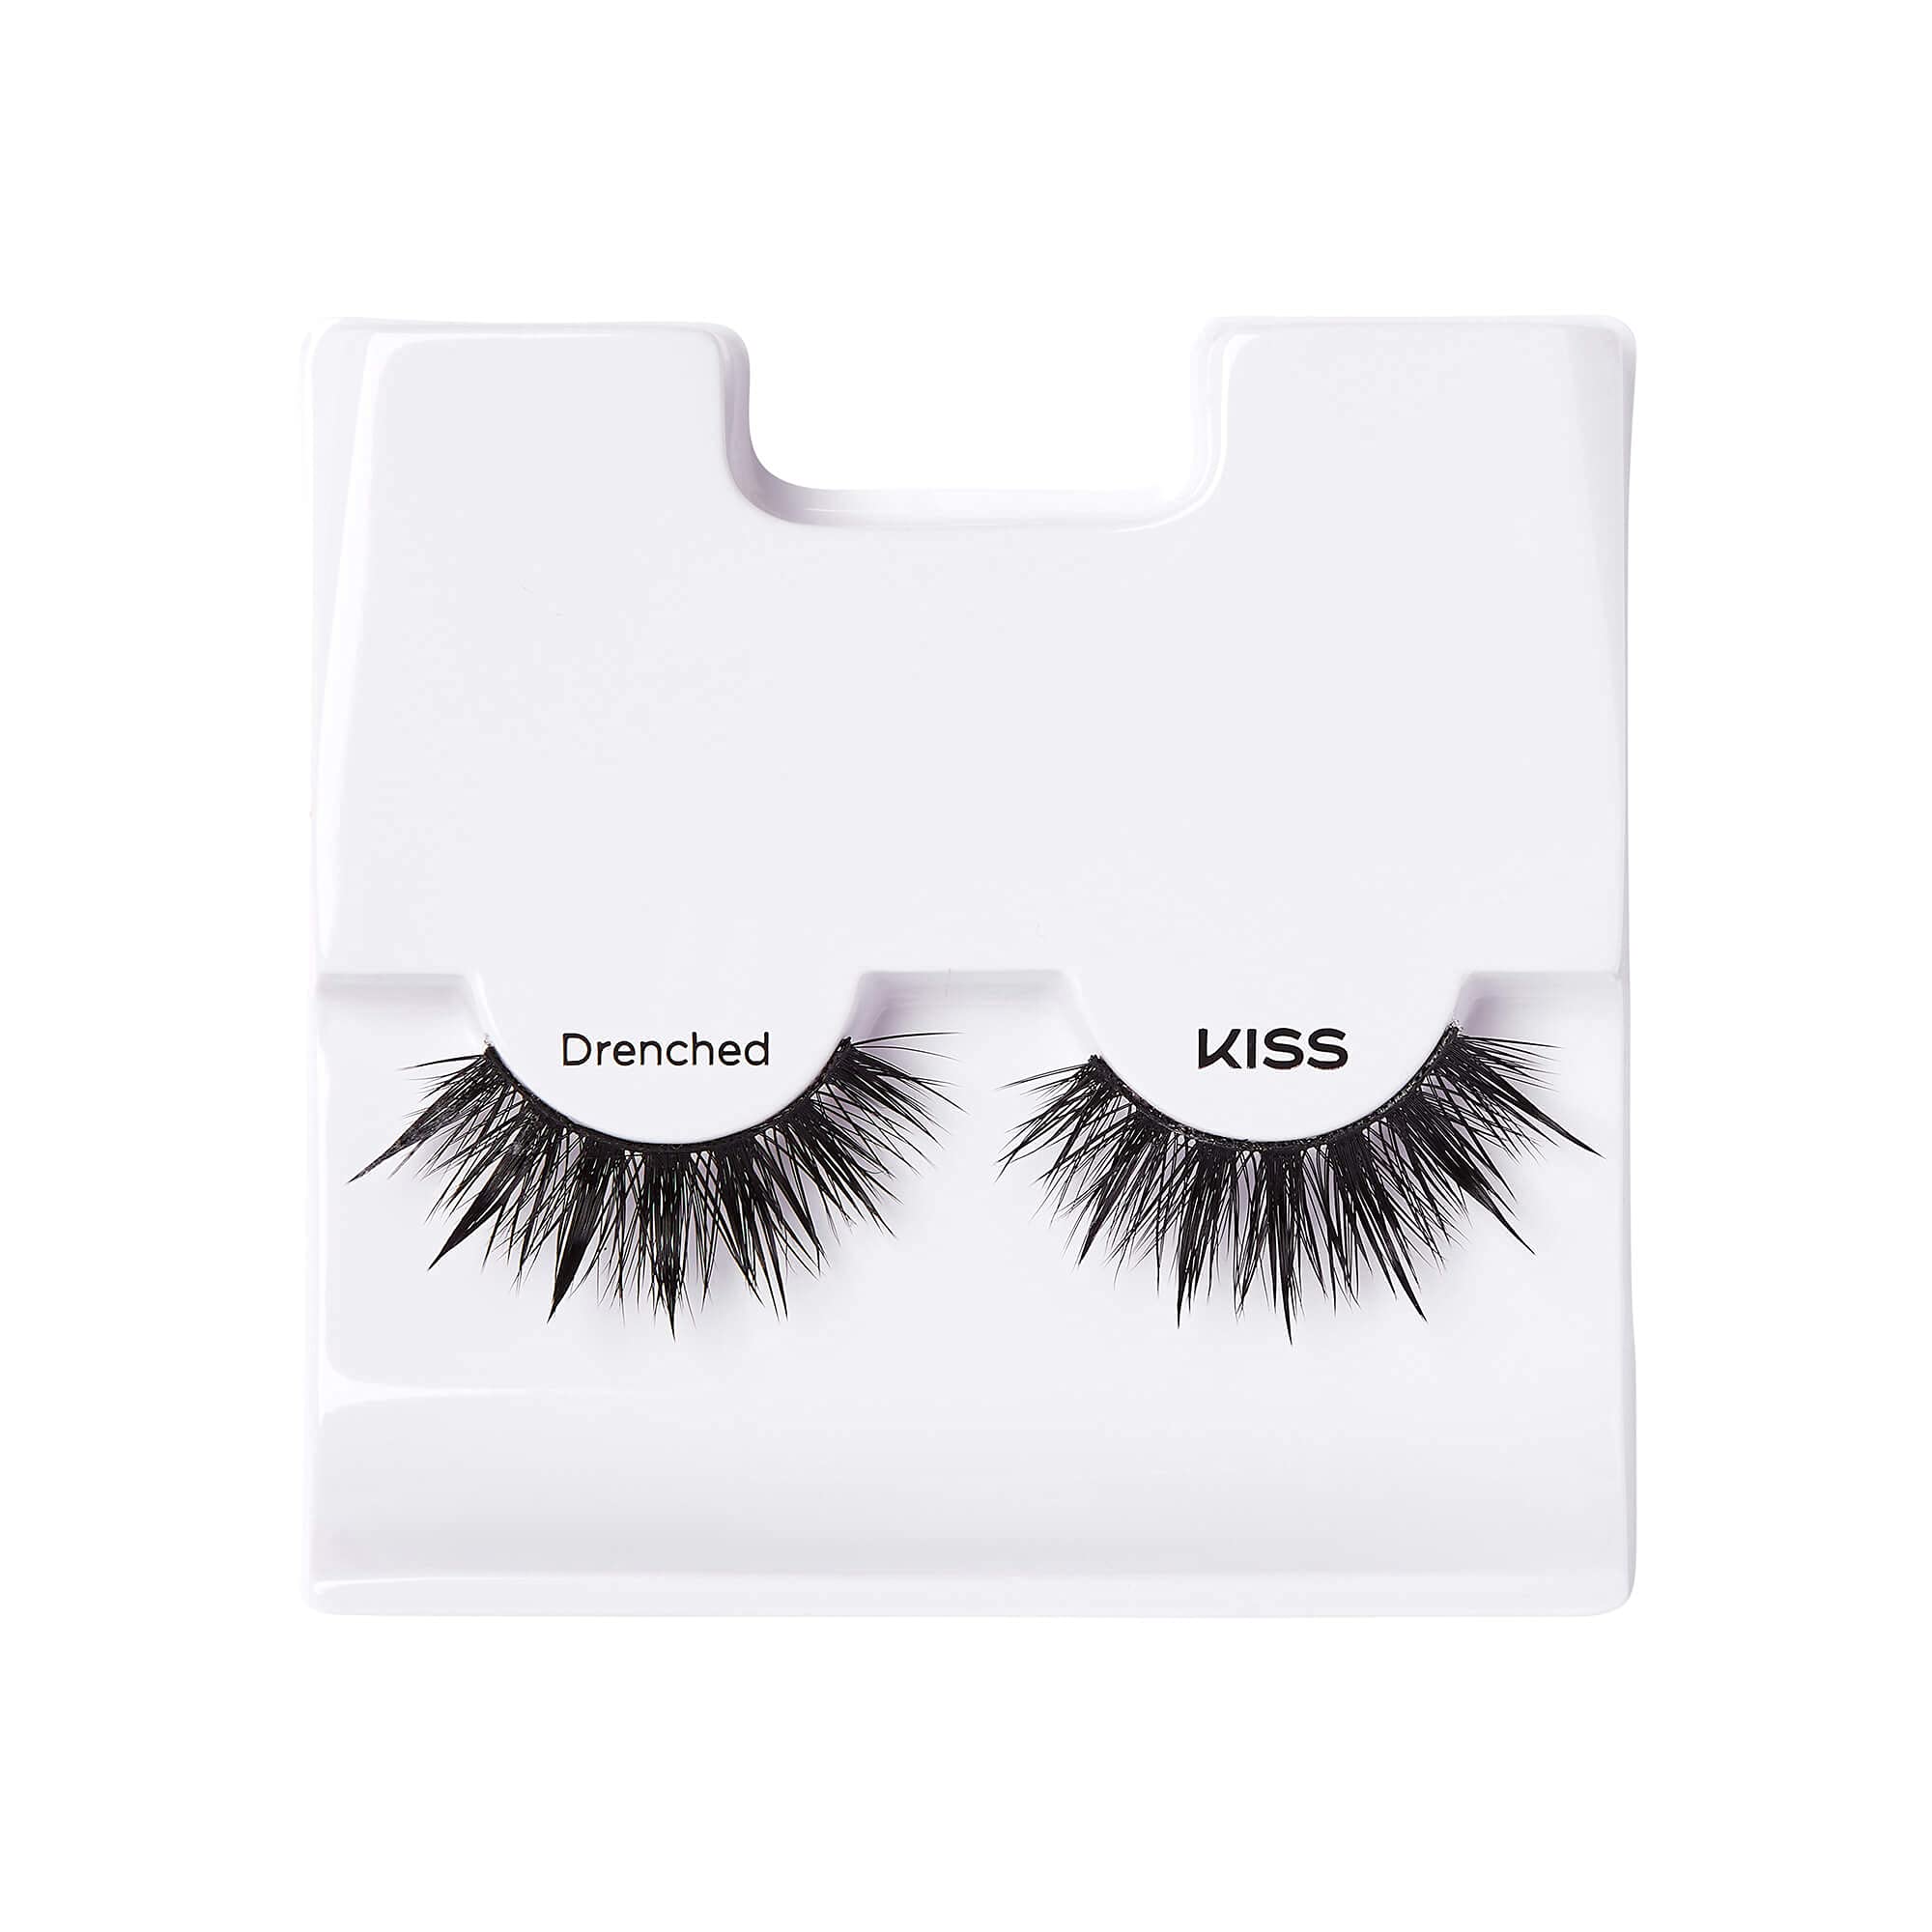 KISS Lash Drip False Eyelashes, Spiky X Boosted Volume, Unique Wet Look Hydrated Effect, Multi-Length Rewearable Fake Eyelashes, Wispy Crisscross Lash Pattern, Style ‘Drenched’, 1 Pair